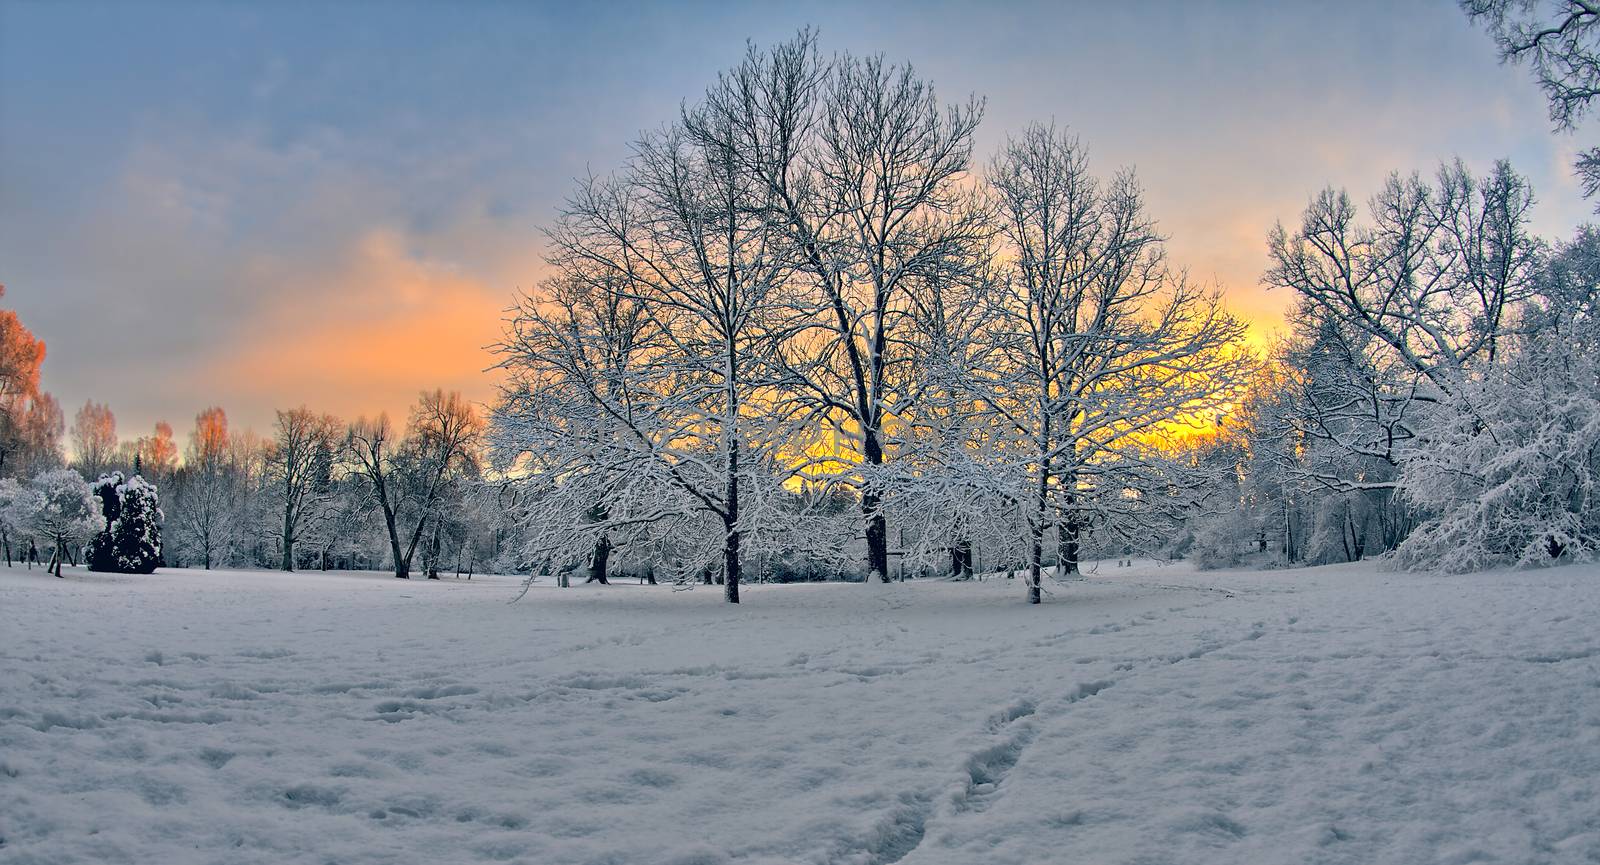 A beautiful winter sunset with trees covered in white snow and the sky turned yellow.